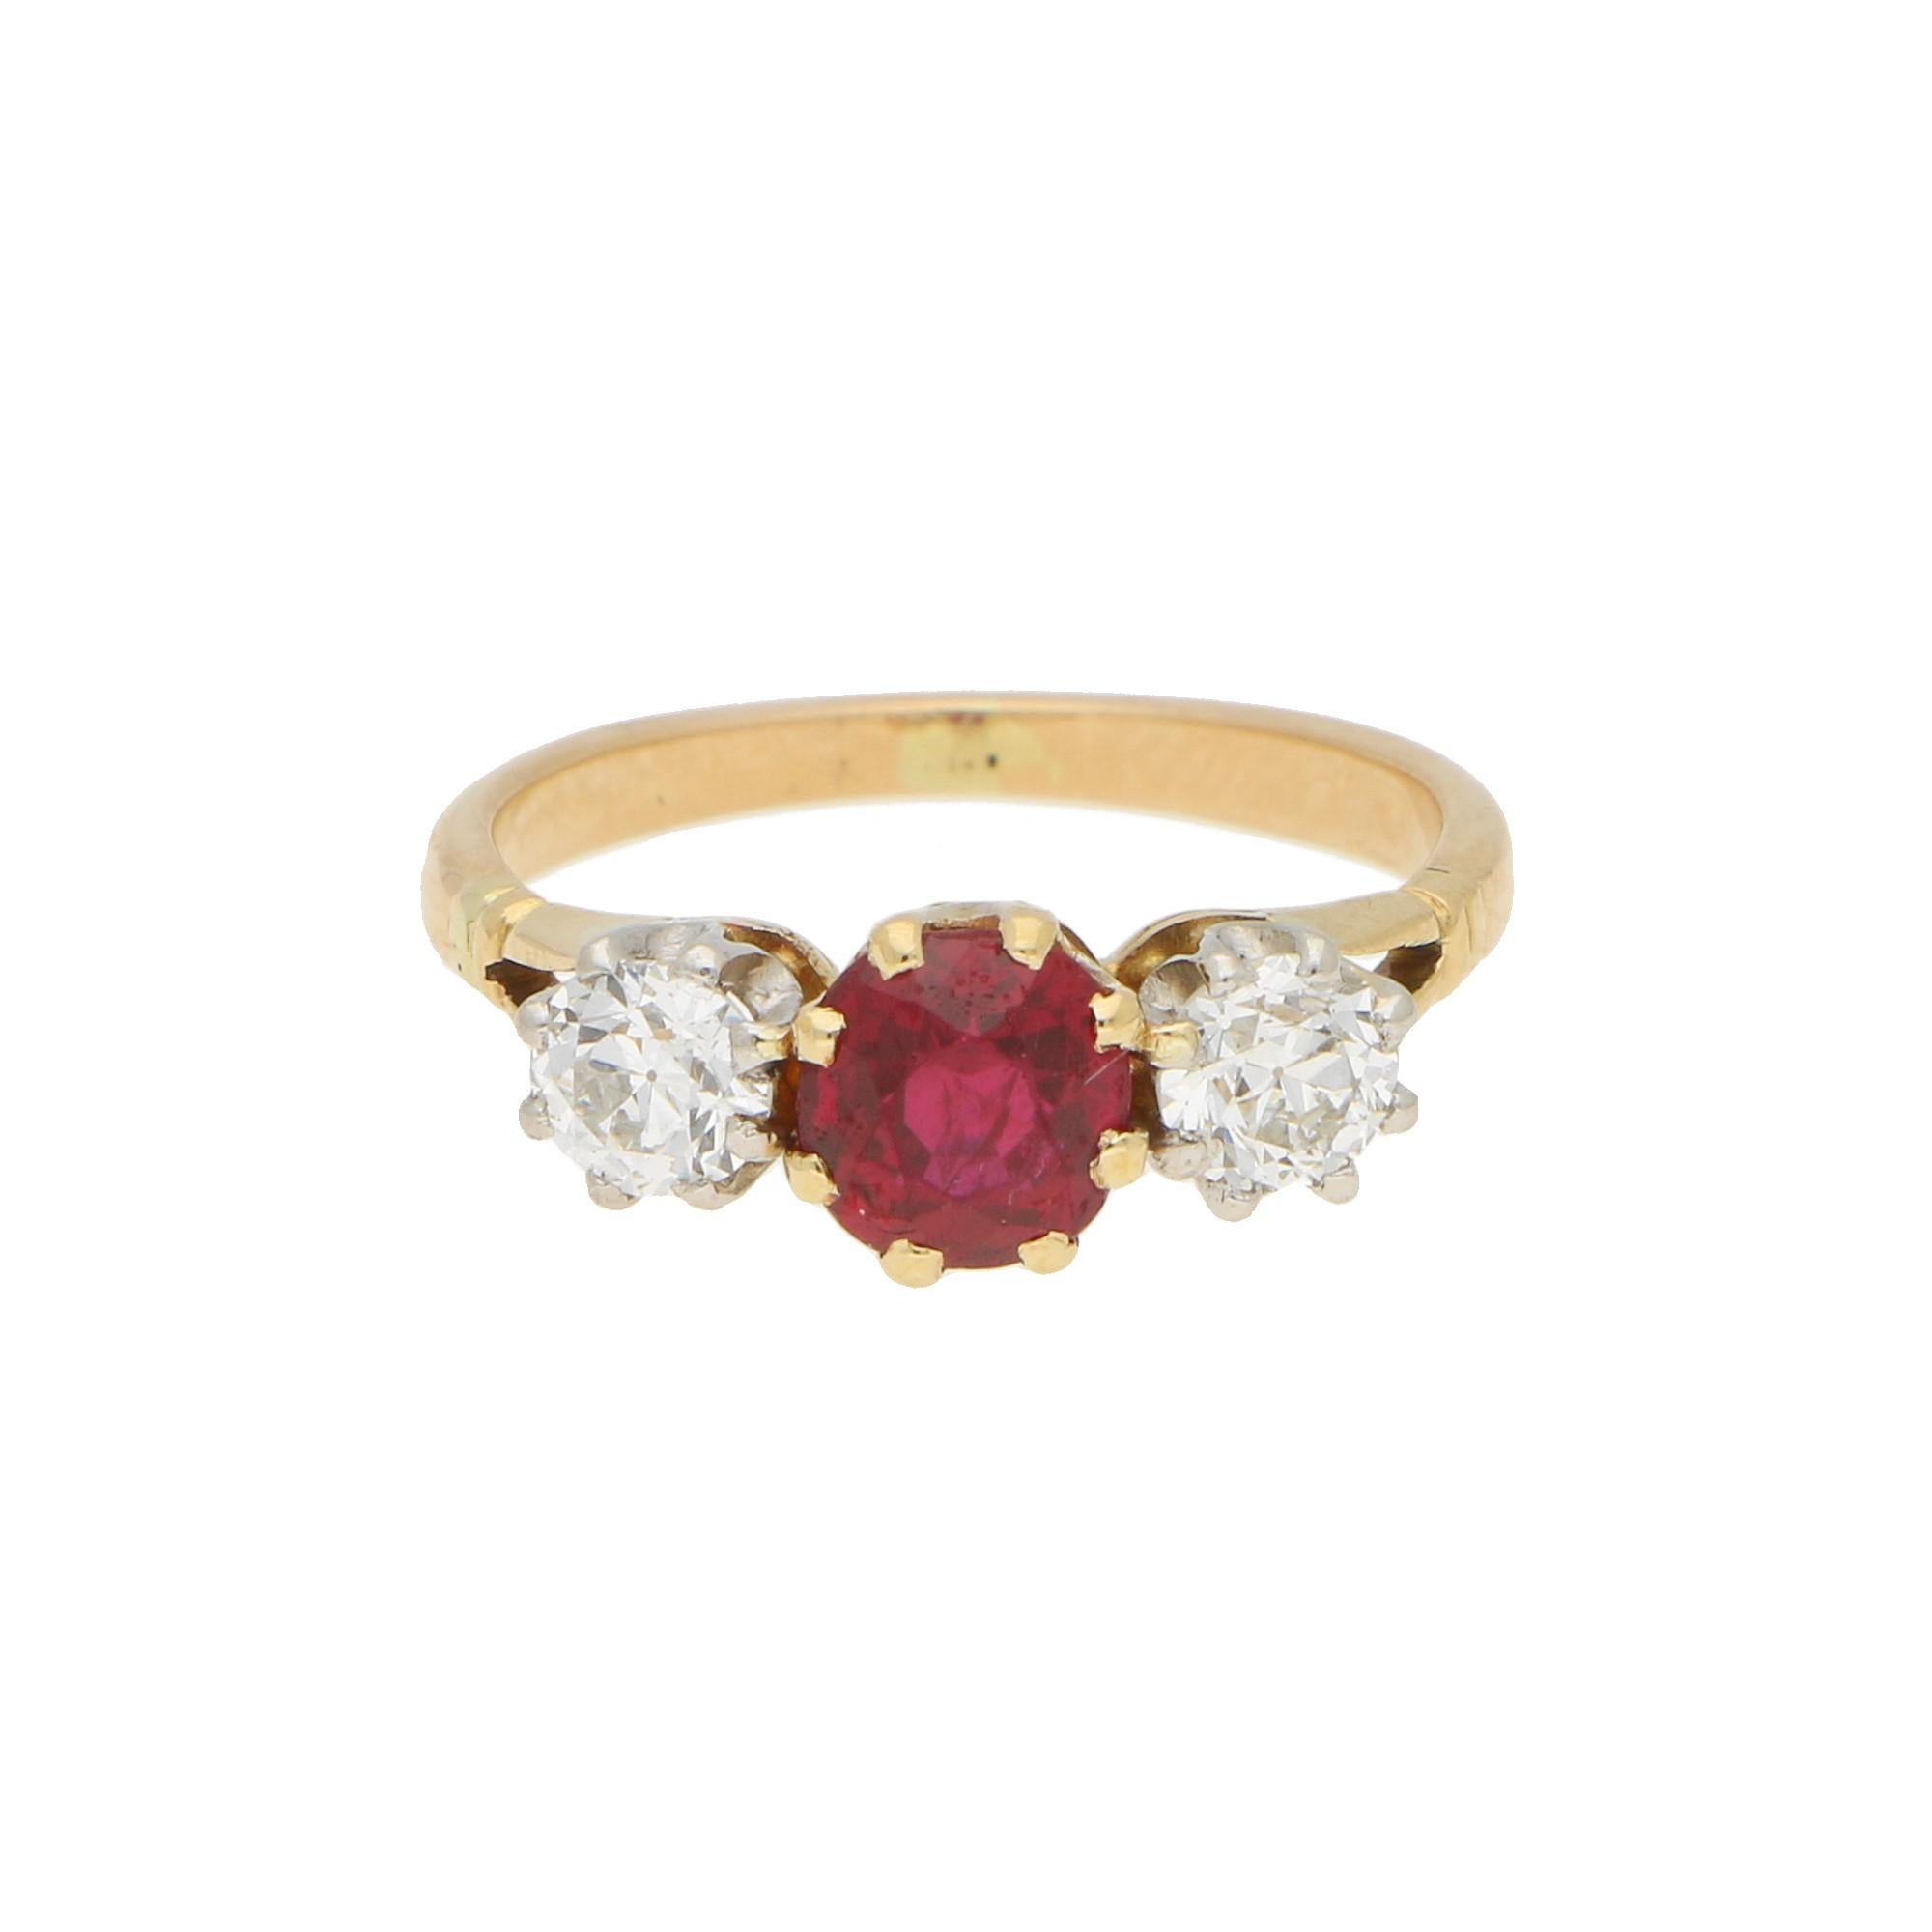 A beautiful late Art Deco ruby and old mine cut diamond trilogy engagement ring set in 18k yellow and white gold.

This classic design of engagement ring is centrally set with a round cut ruby which is a beautiful Burmese red colour. This ruby is